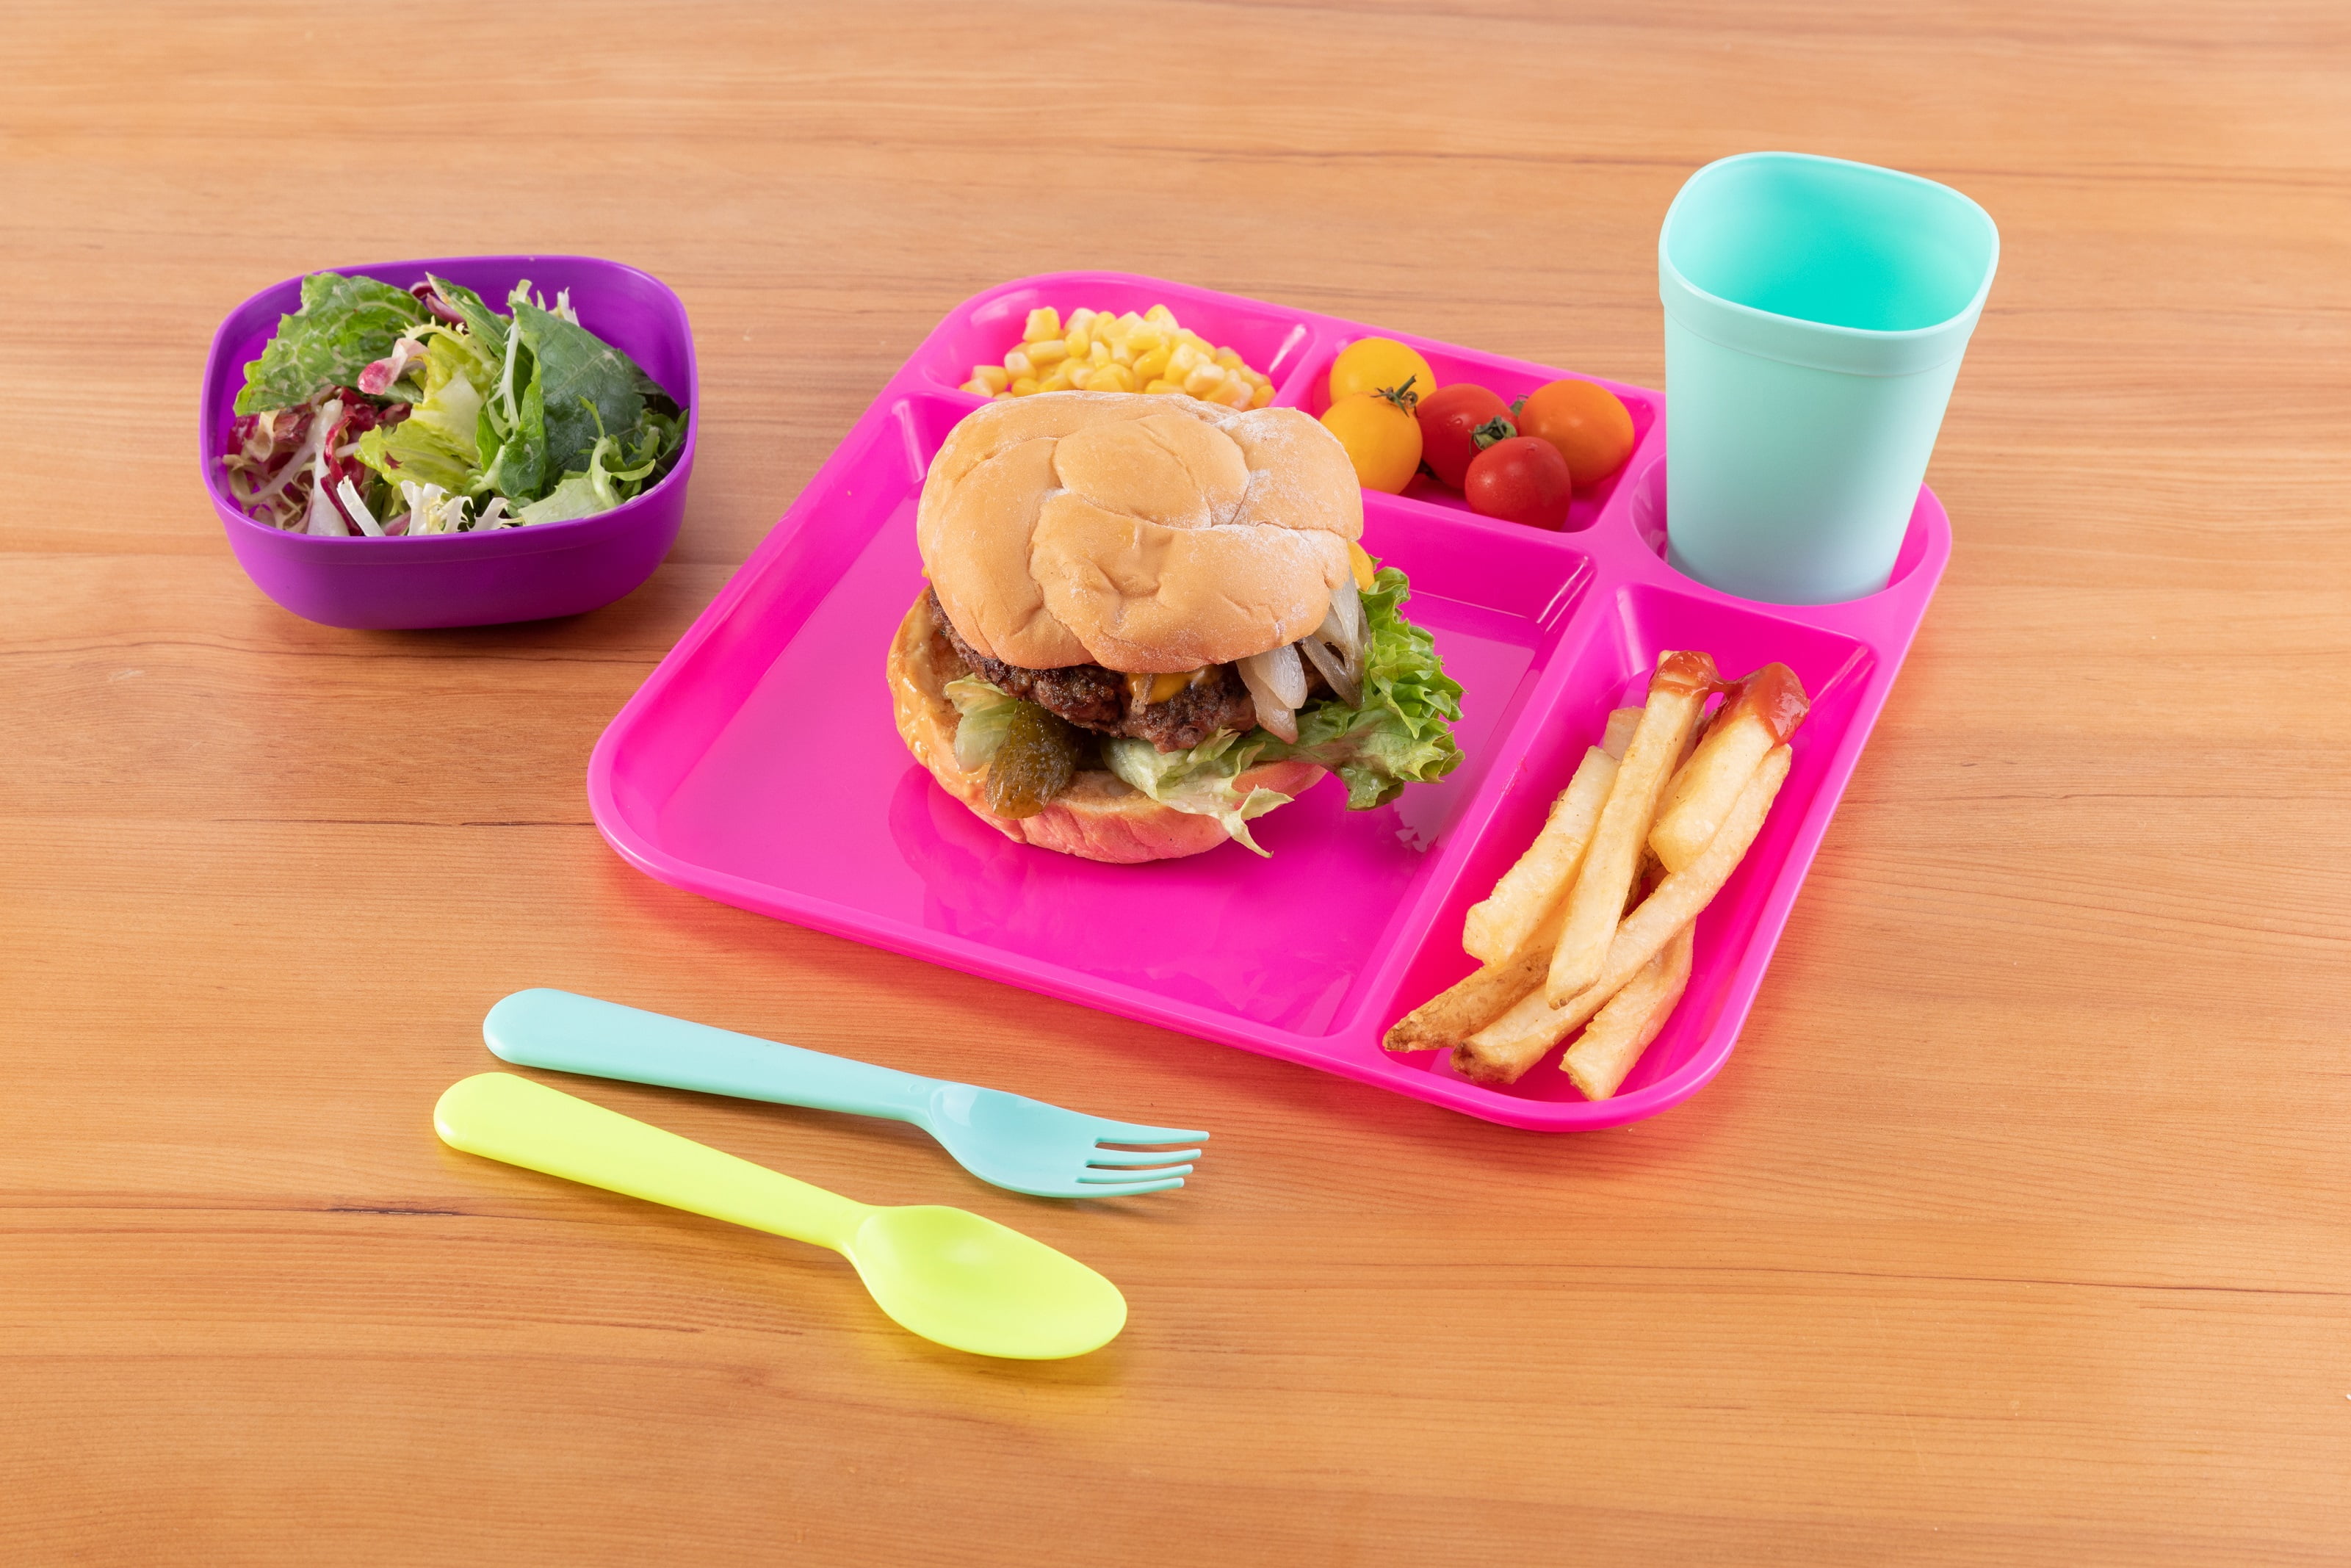 Details about   Your Zone 24 pc Kids' Dinnerware Set 